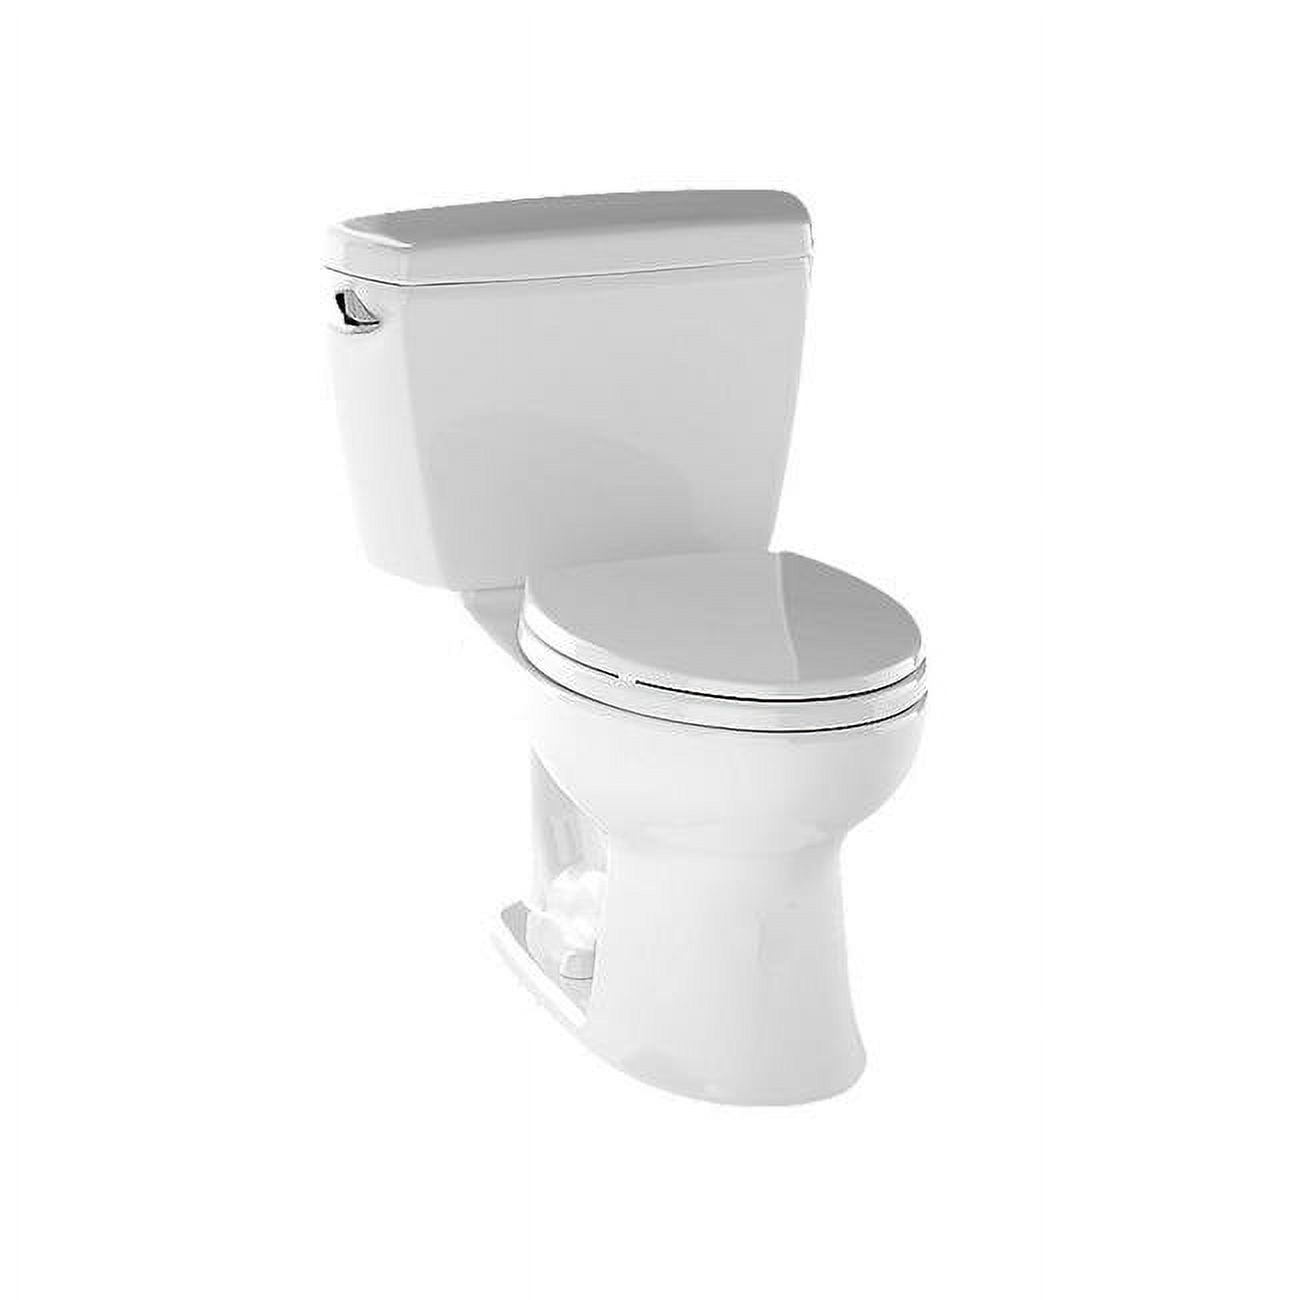 TOTOÂ® Eco DrakeÂ® Two-Piece Elongated 1.28 GPF Universal Height Toilet for 10 Inch Rough-In, Cotton White - CST744EF.10#01 - image 2 of 2